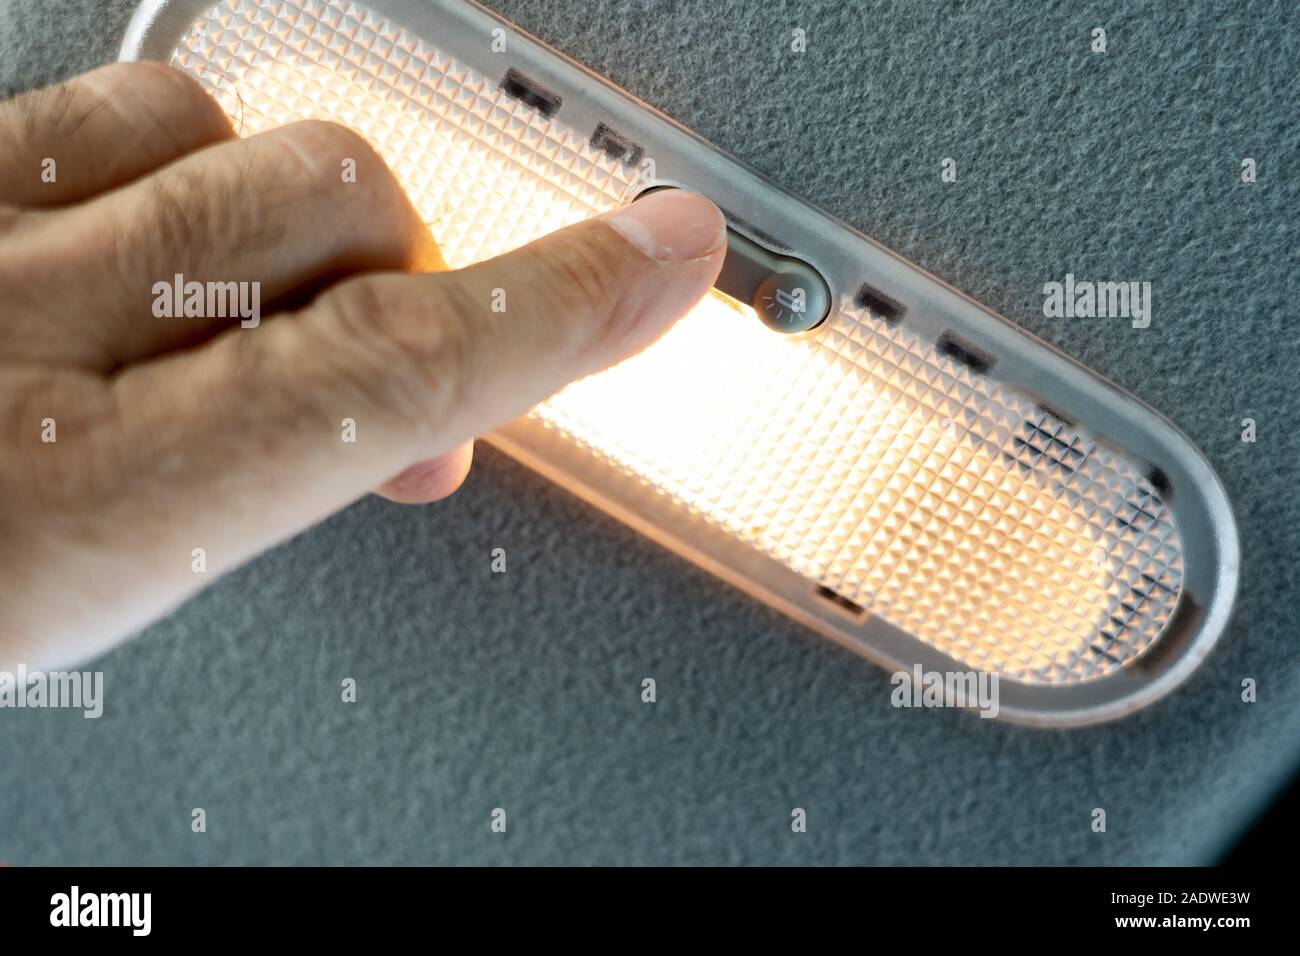 Turn on the lamp with the button. Closeup photo of hands man turning light on in car salon. Stock Photo